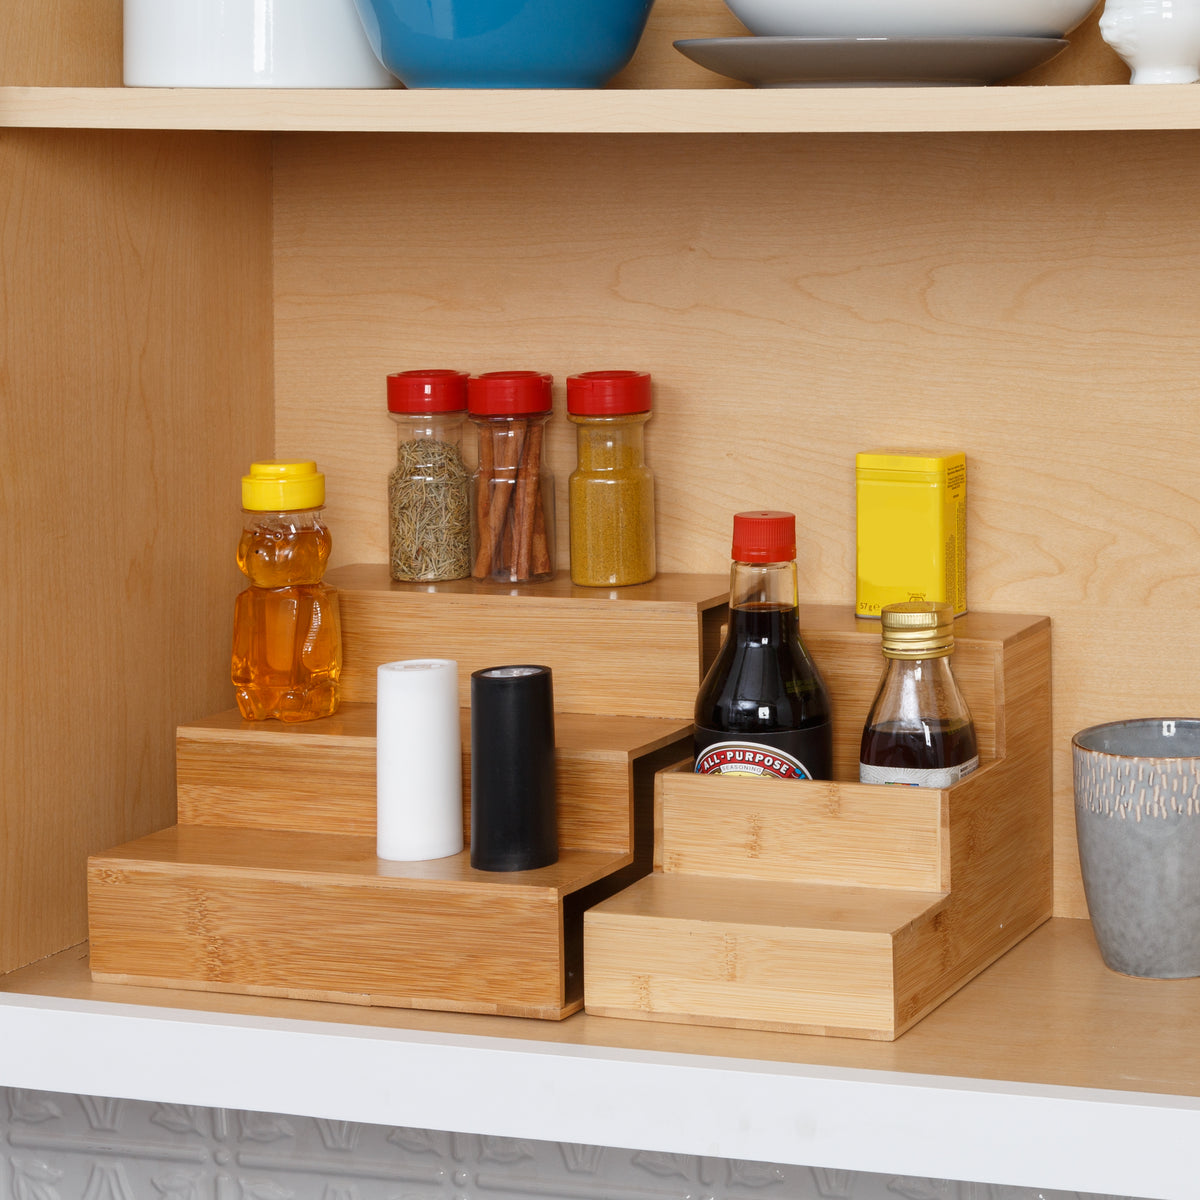 Bamboo Expandable Spice Rack Brown - Brightroom™